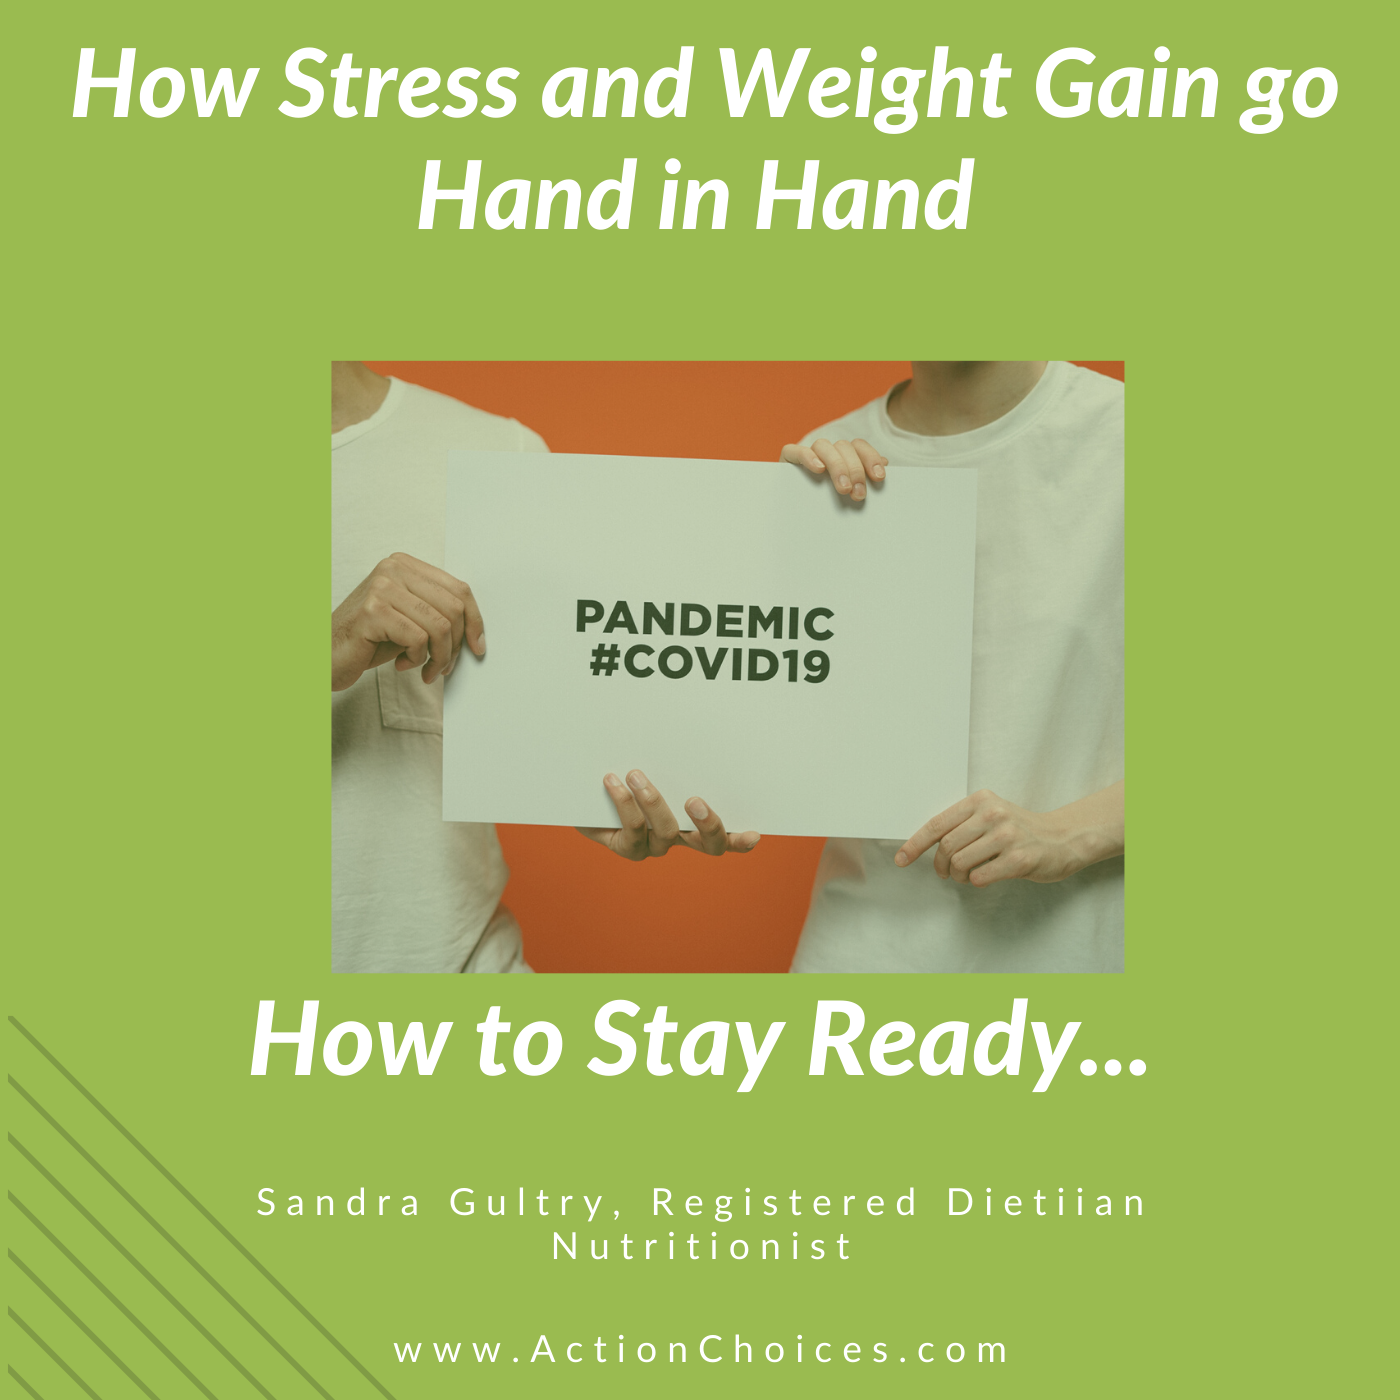 Stress and Weight Go Hand in Hand